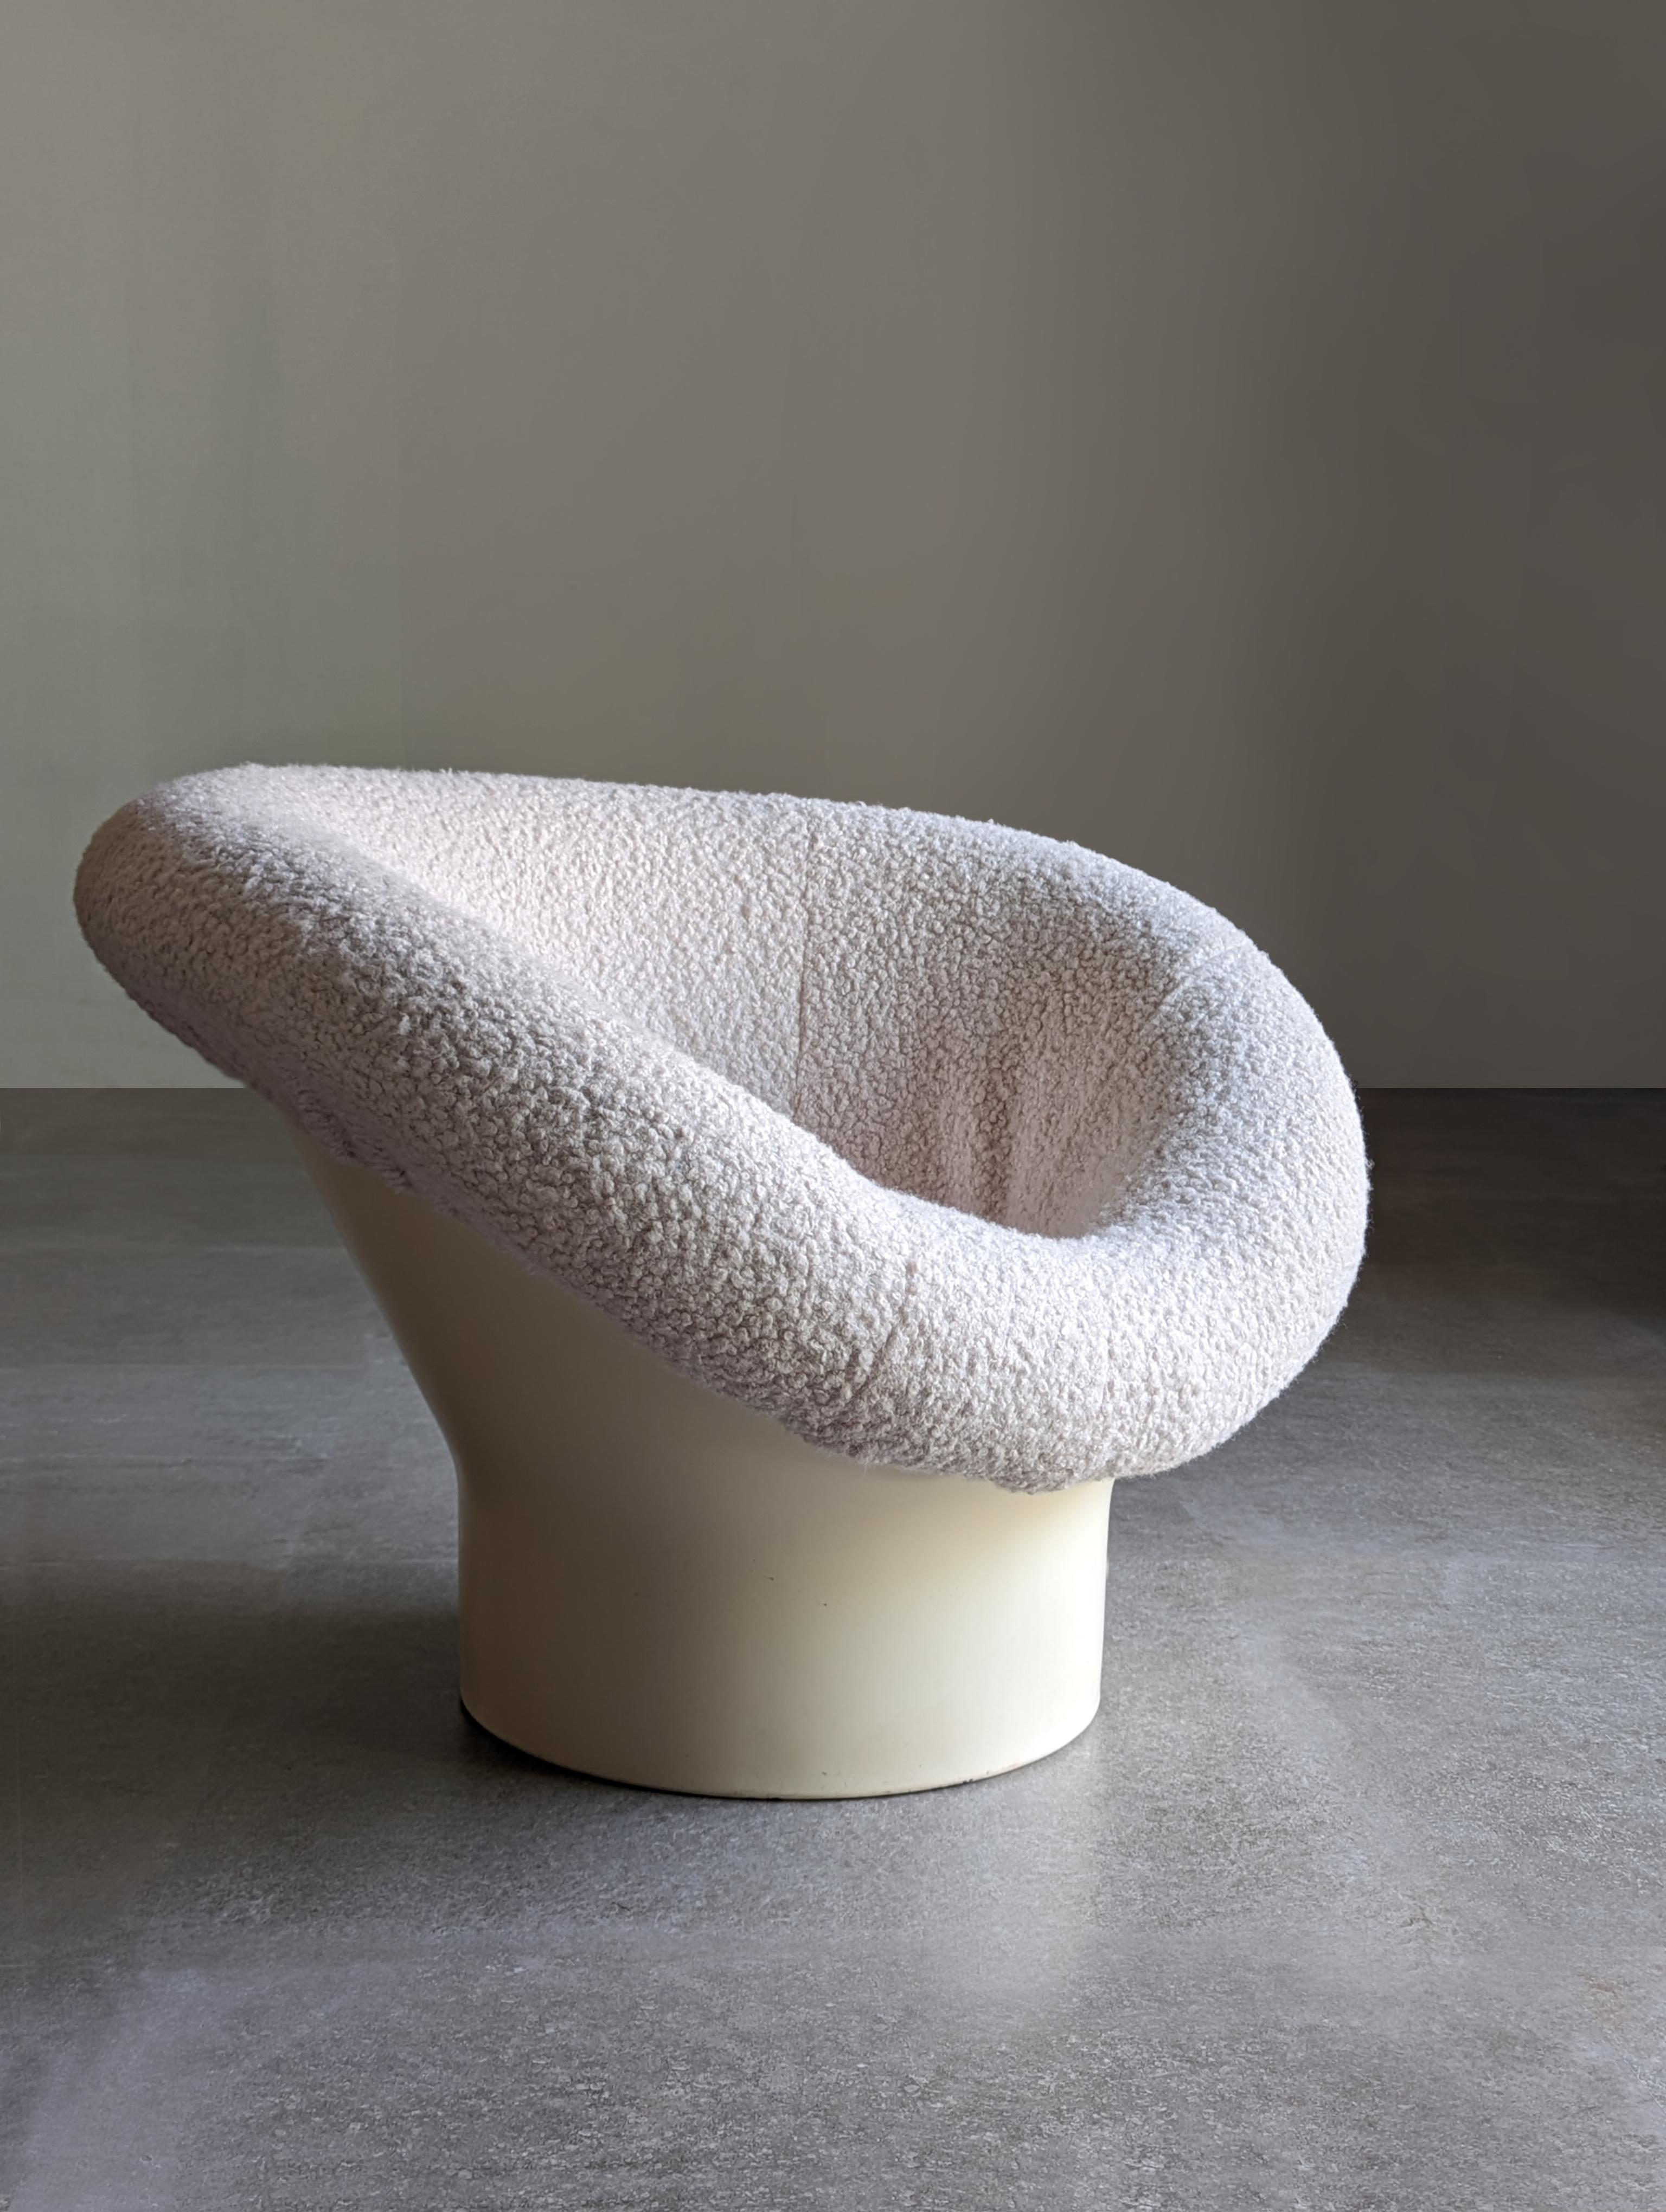 The Krokus Armchair presents a unique and elegant silhouette, with a round base with an oval mouth and a cylindrical structure that provides a stable and solid base. Its body is made of a single piece of high-quality fiber, which offers a smooth and